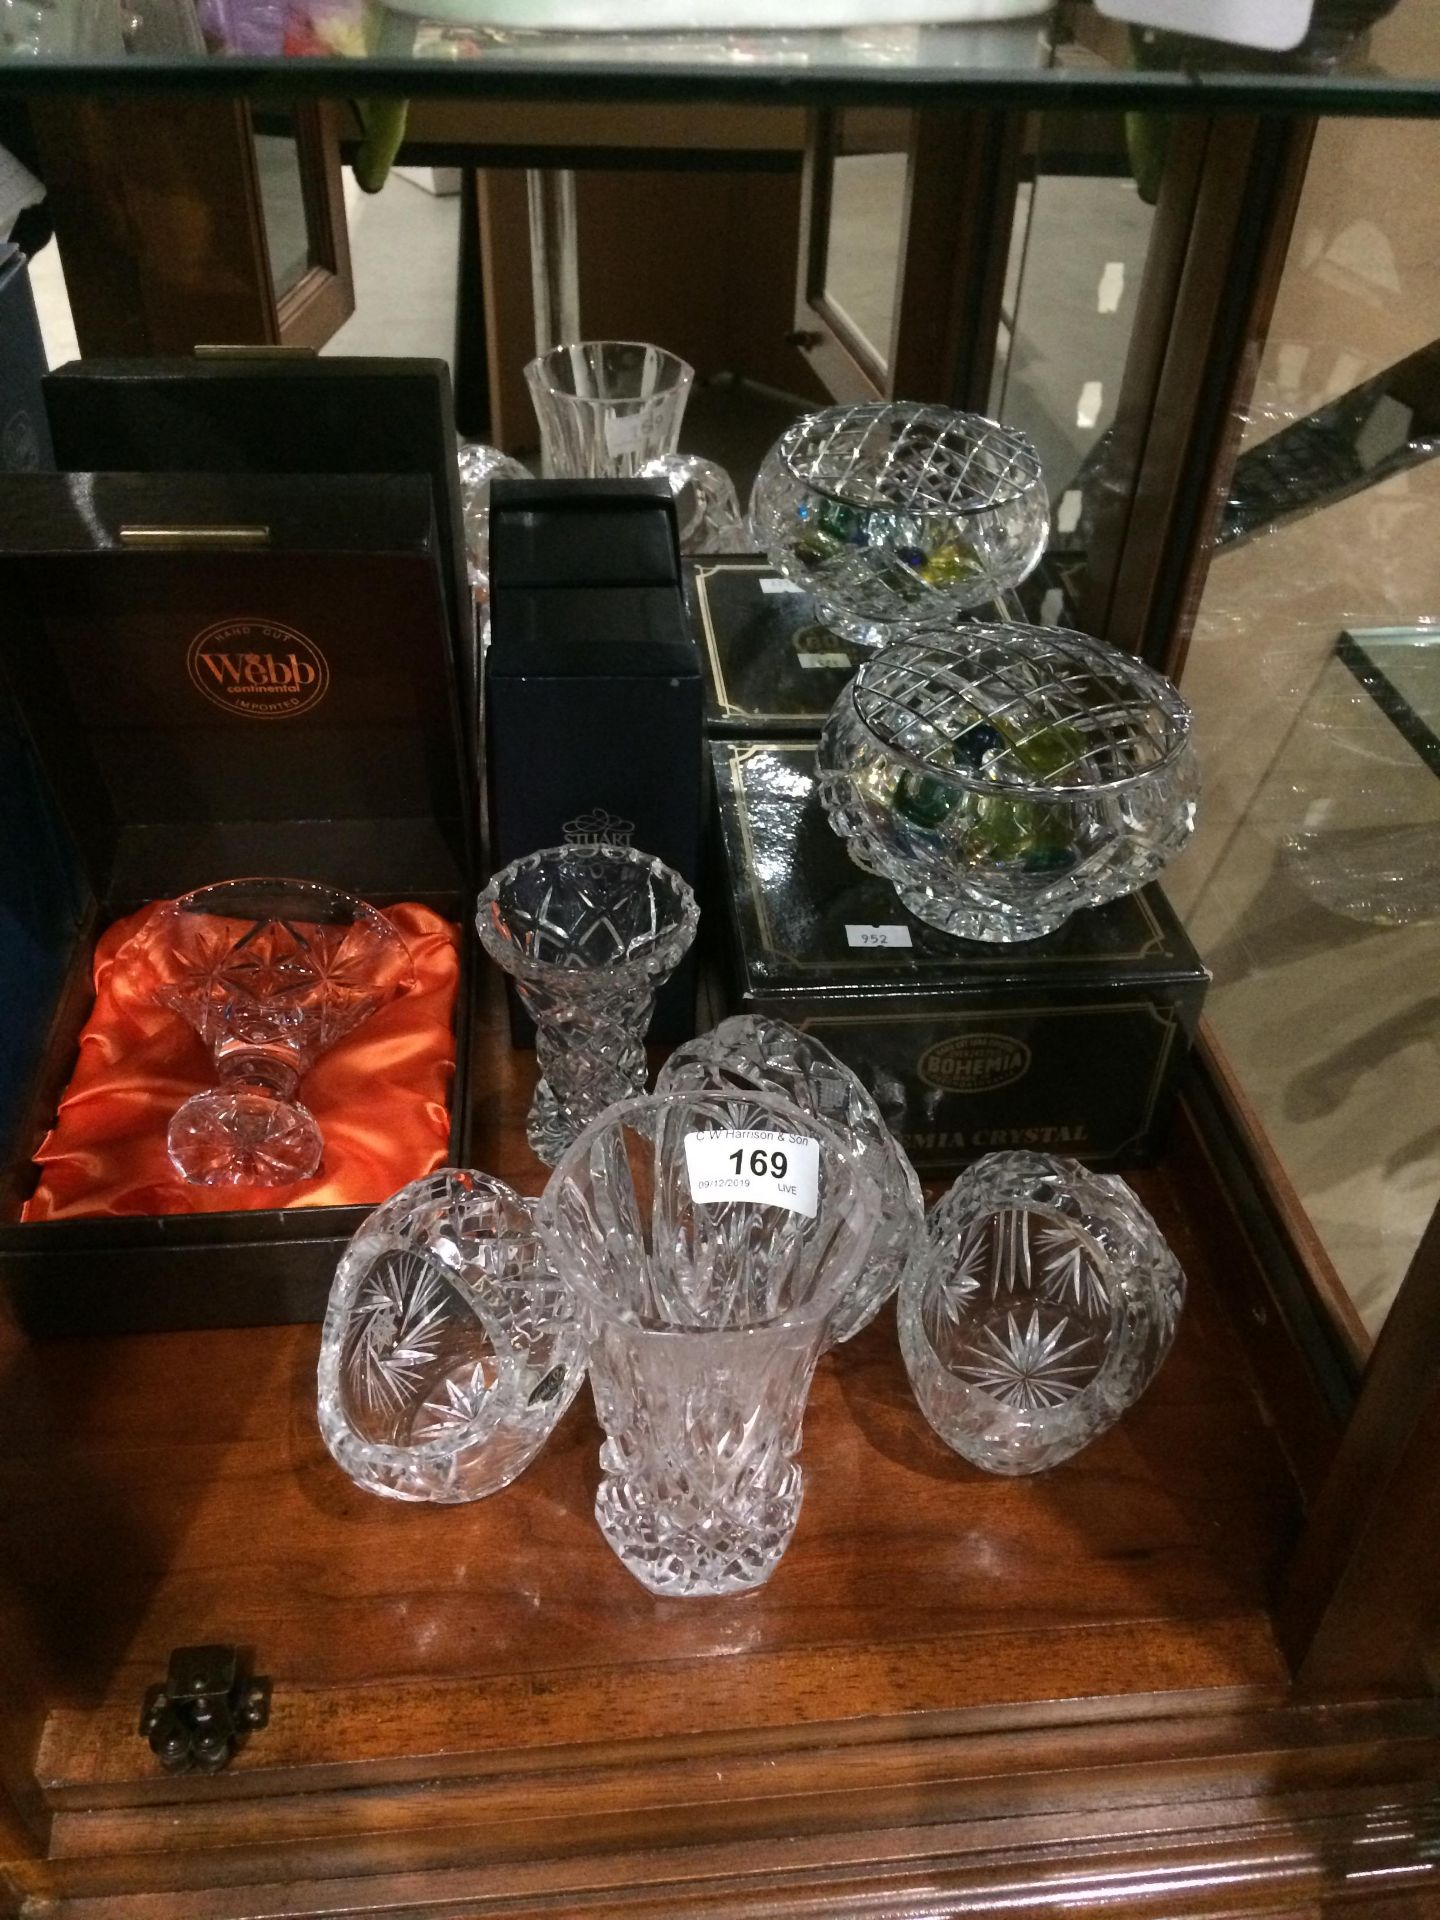 Contents to corner bottom shelf of cabinet - various lead crystal glasses and vases by Webb,